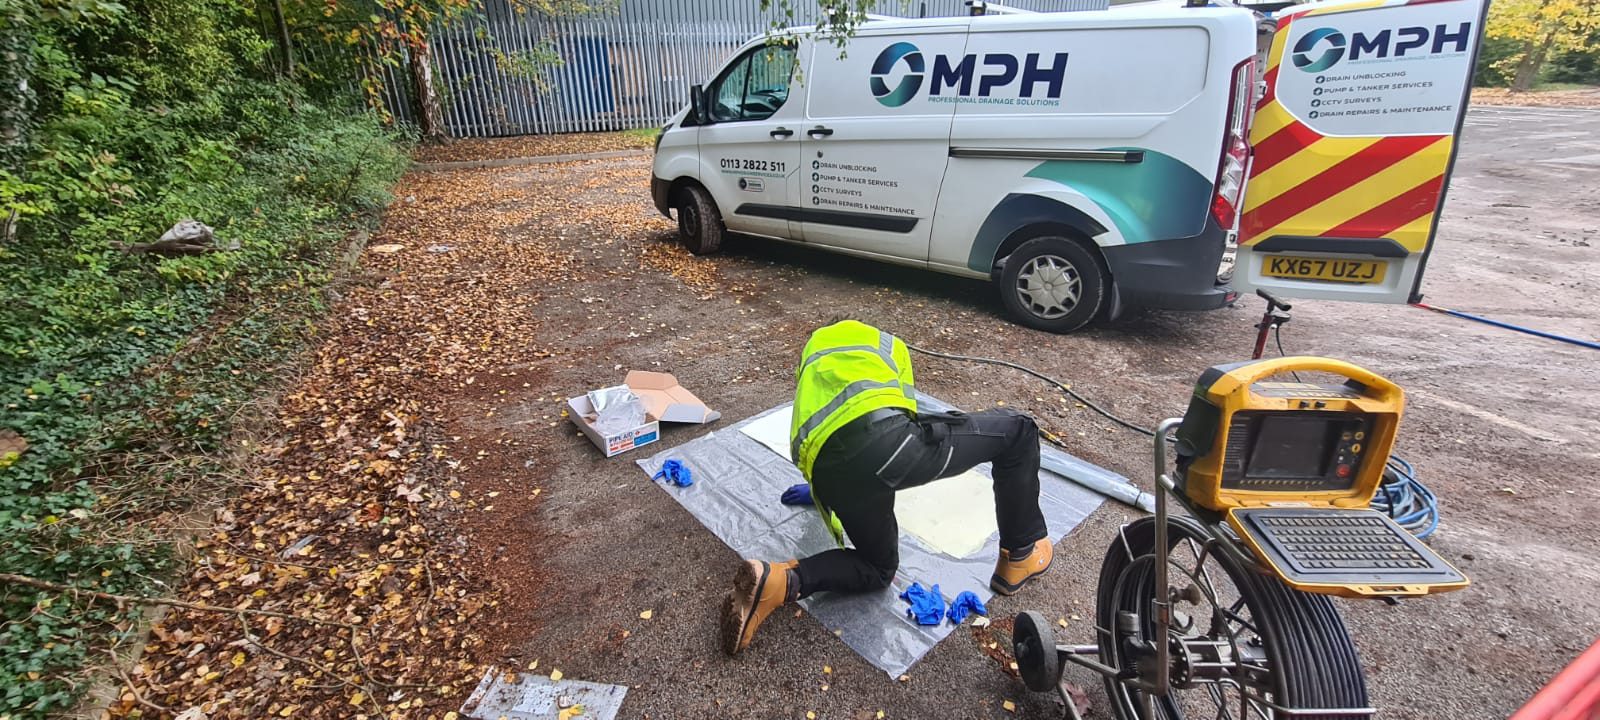 24/7 Drainage Solutions | Leeds, York, Wakefield | MPH Drain Services